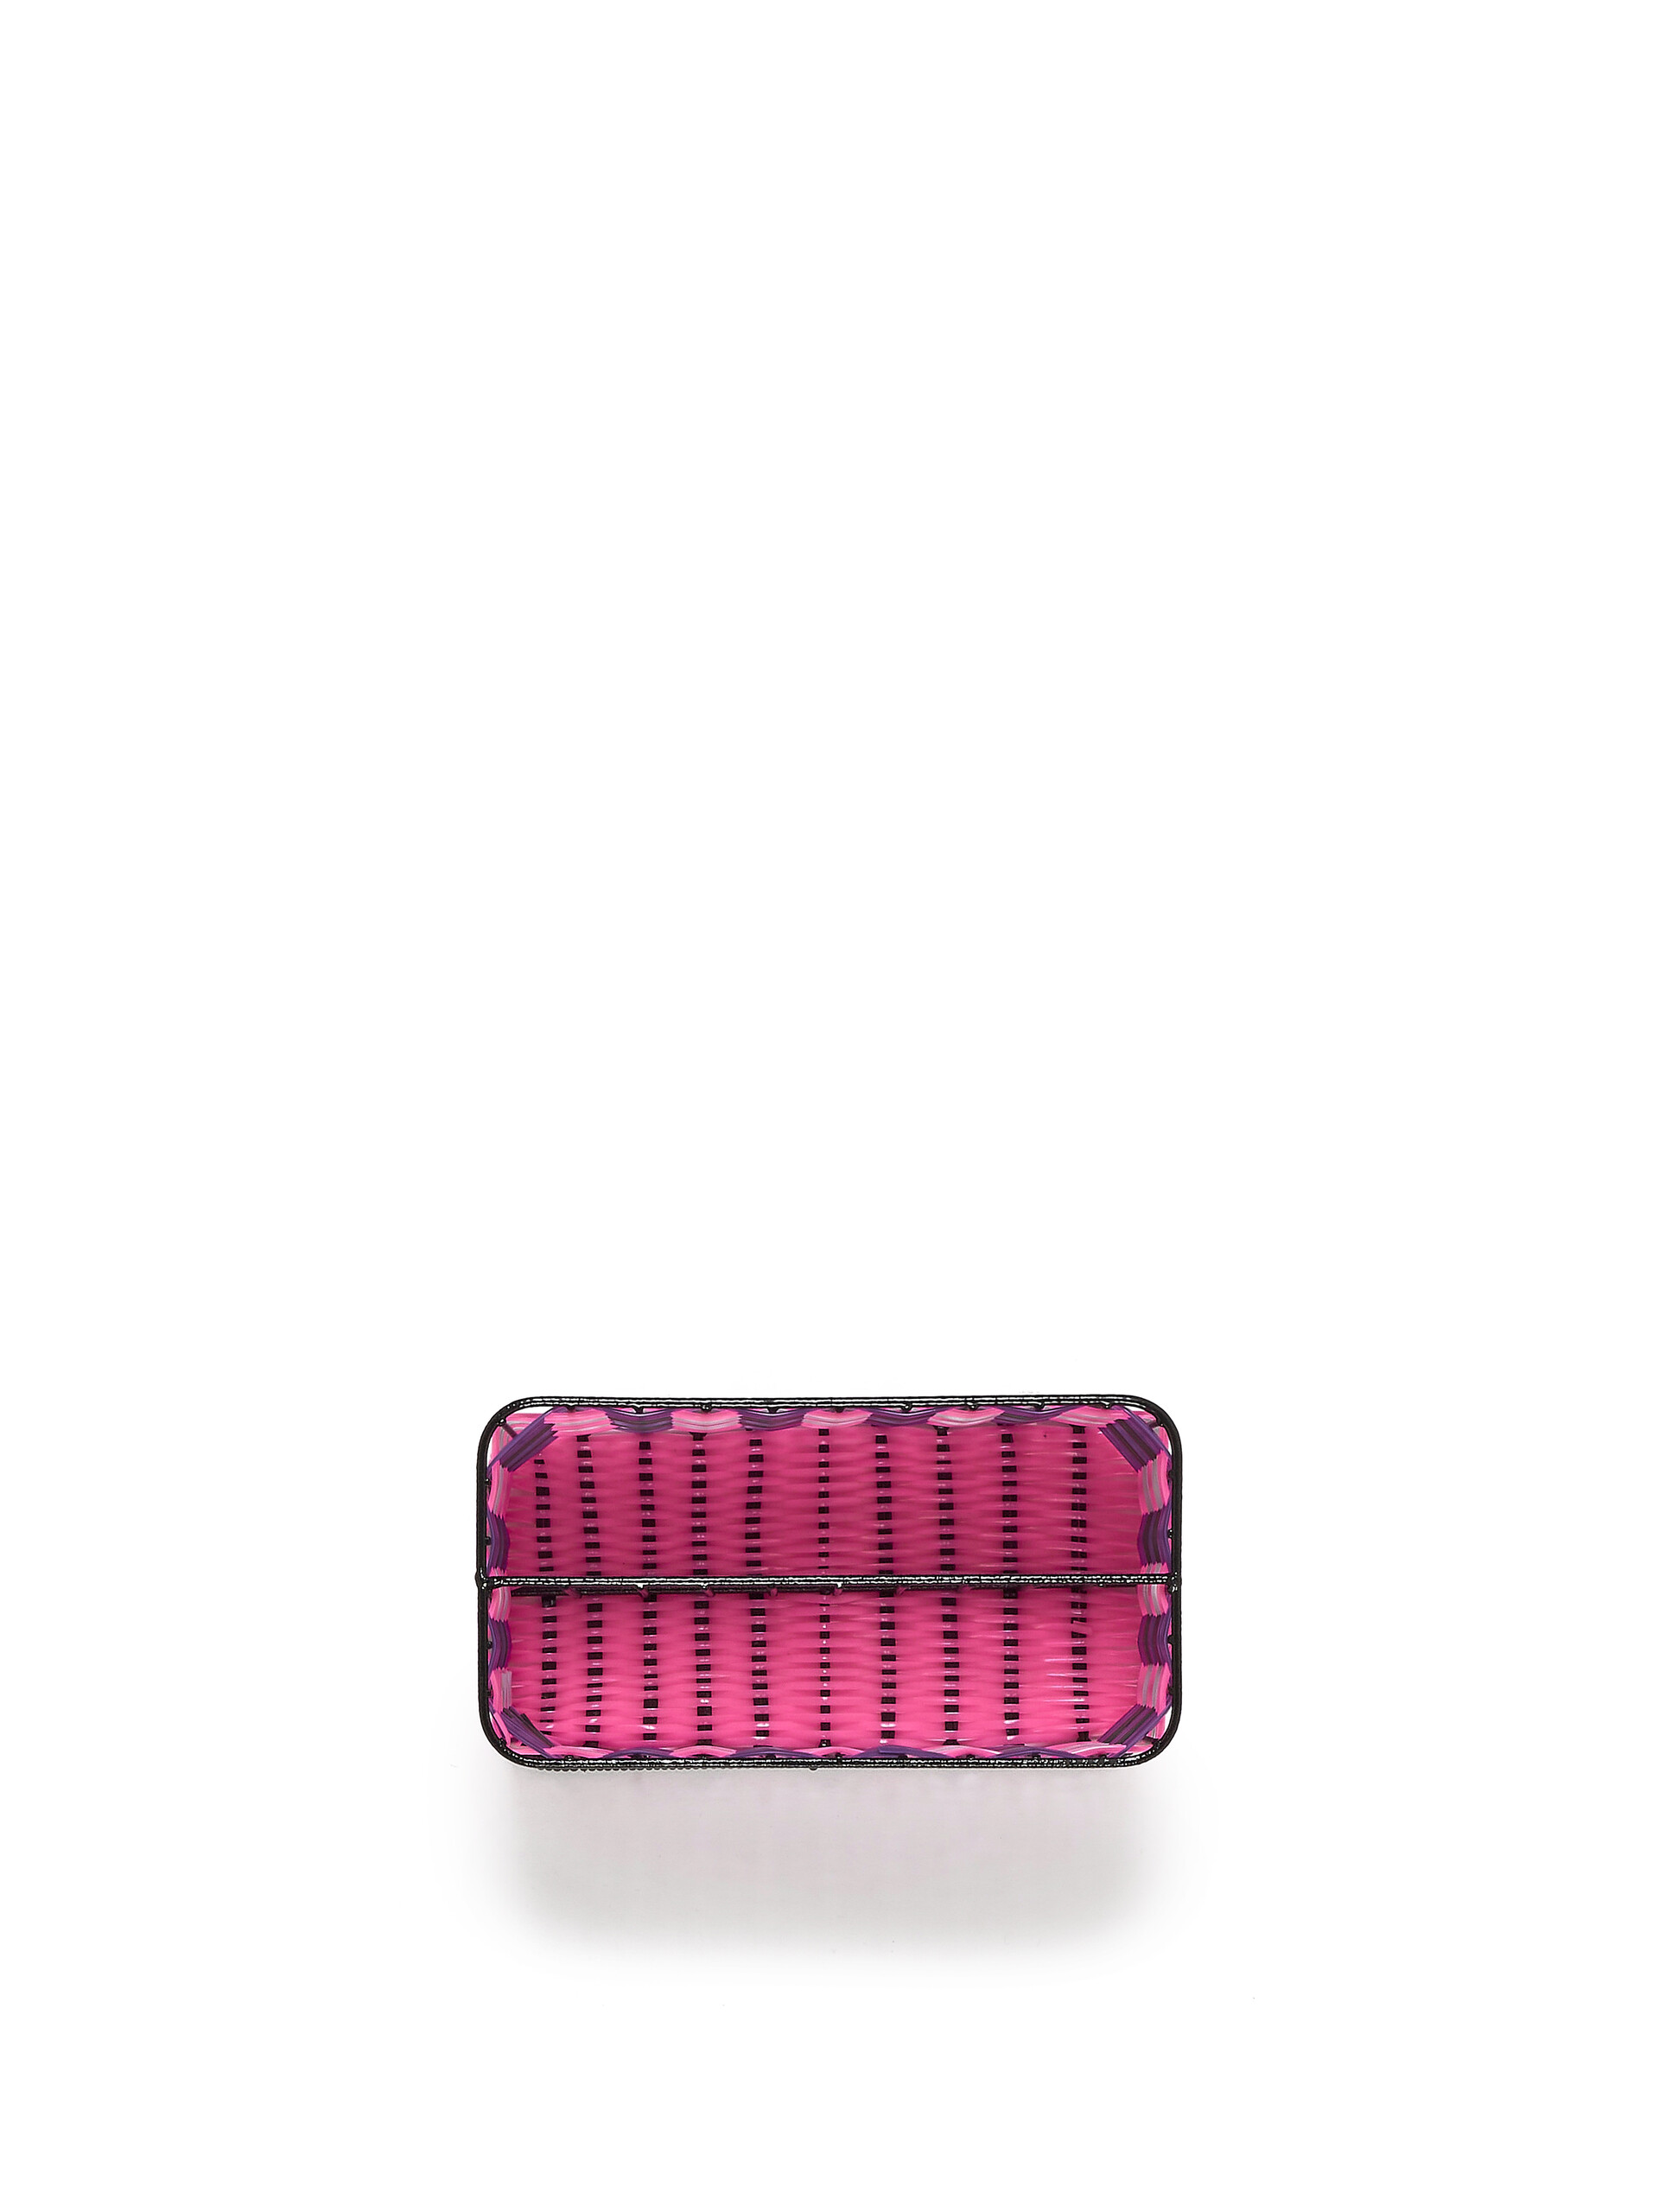 Pink MARNI MARKET woven cable cutlery basket - Accessories - Image 4